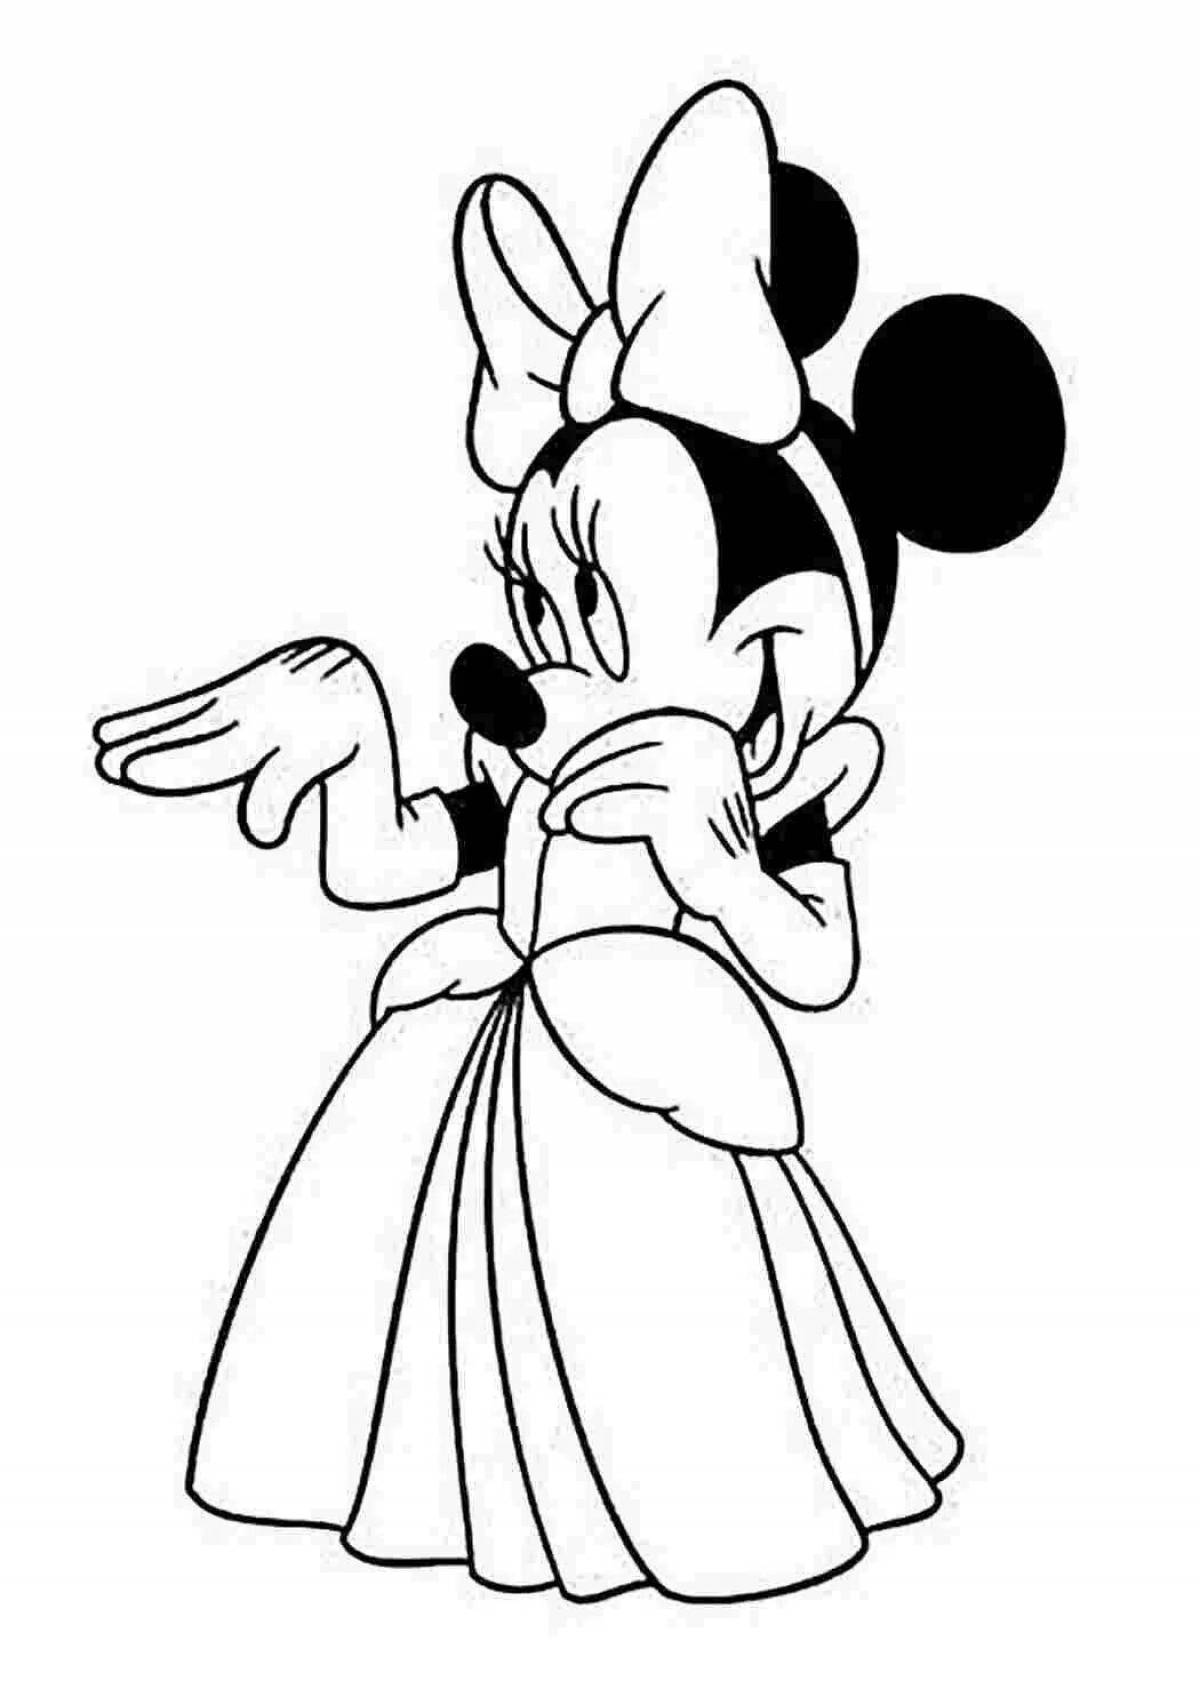 Minnie mouse funny coloring book